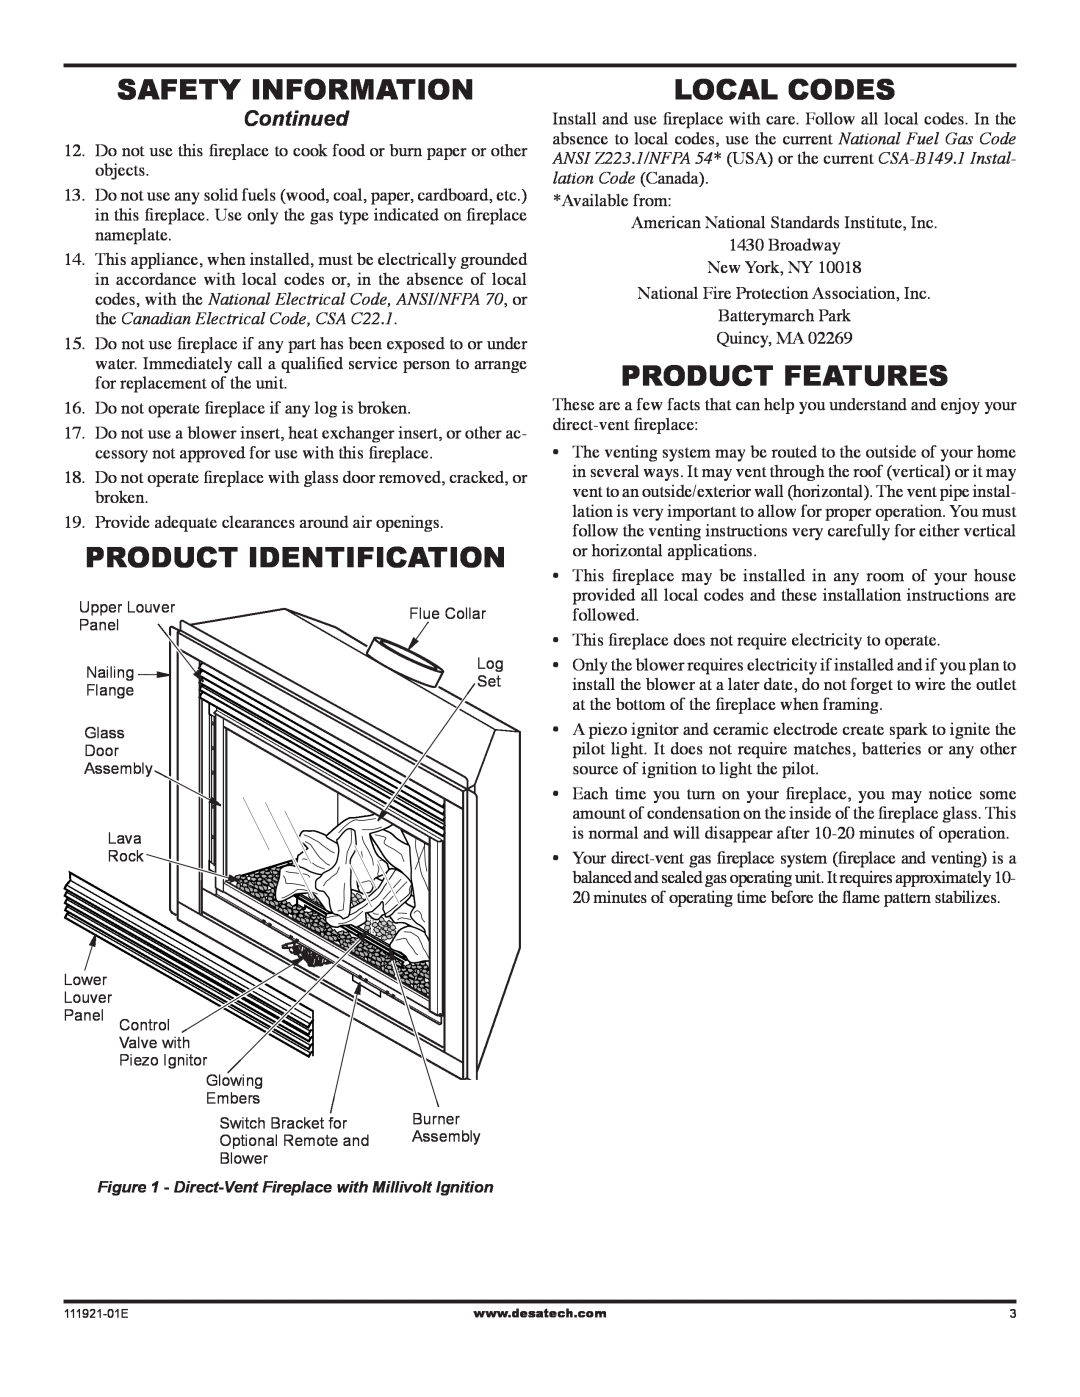 Desa (V)K42P installation manual Safety information, Product Identification, Local Codes, Product Features, Continued 